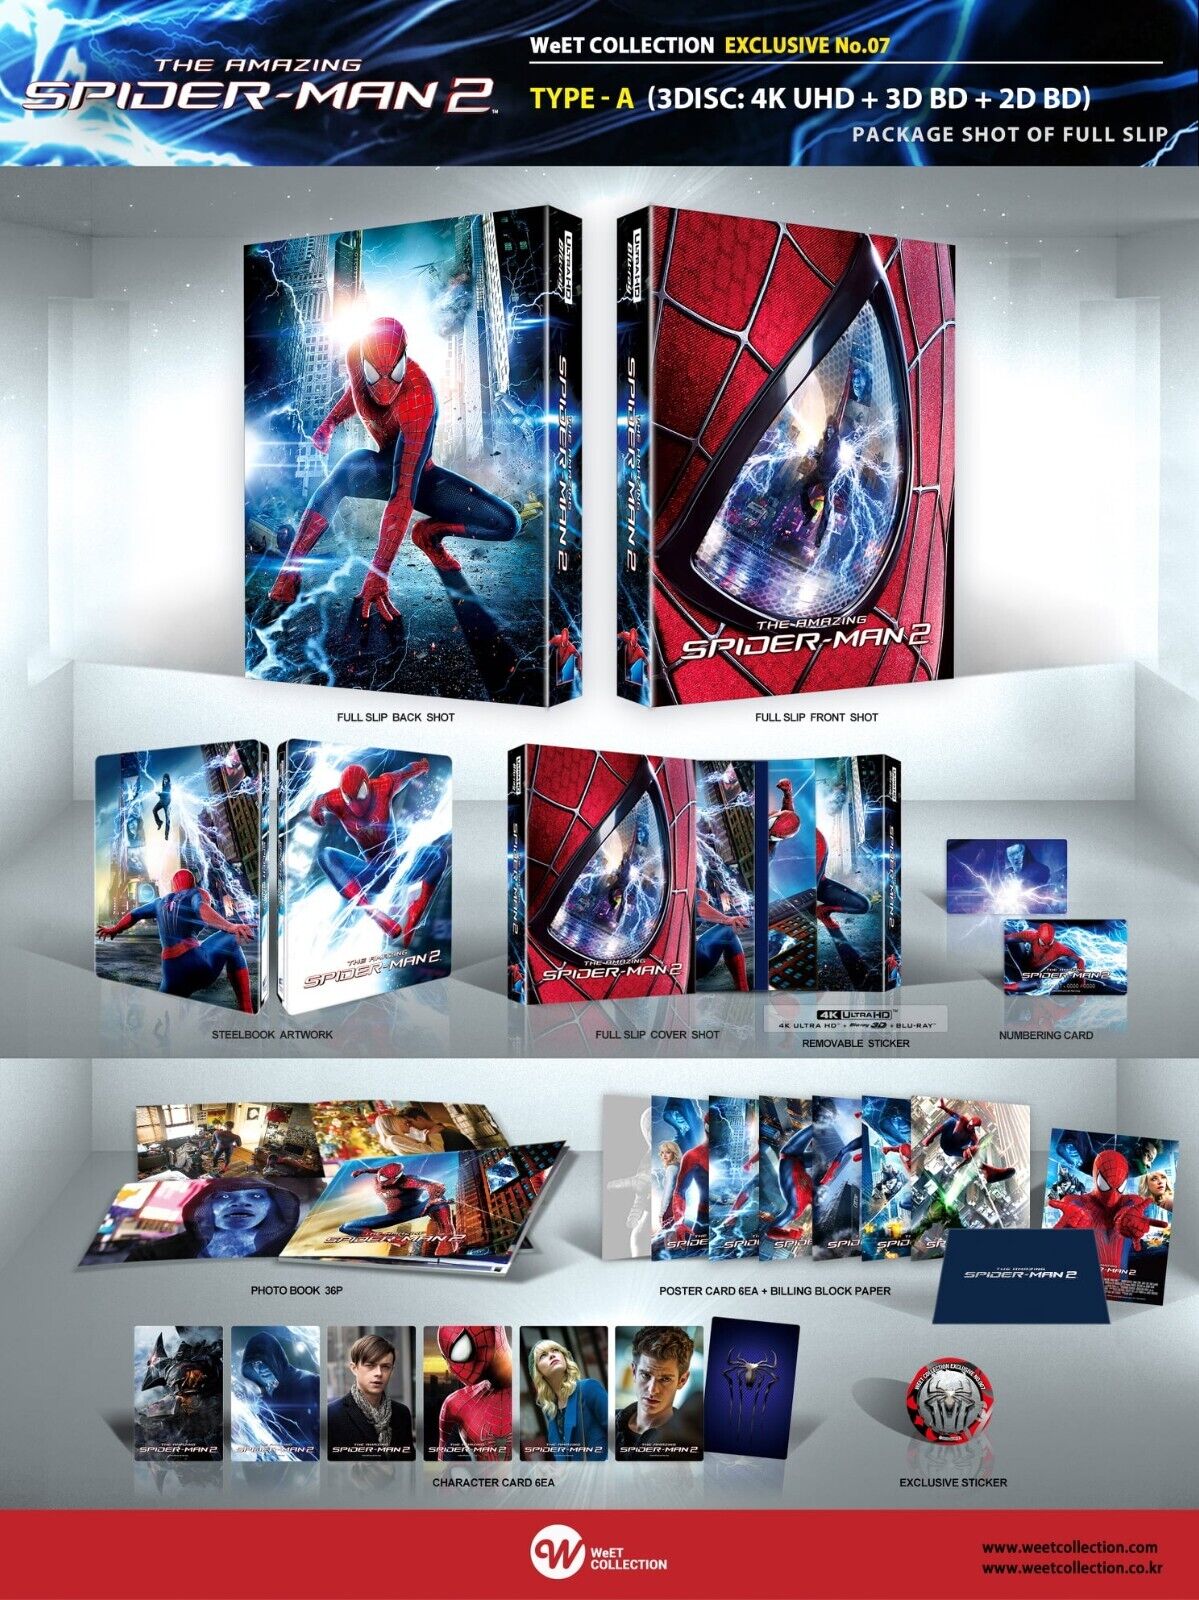 The Amazing Spider-Man 1+2 4K+2D Blu-ray Steelbook LE WeET Collcection Exclusive #6 & #7 One Click Box Set